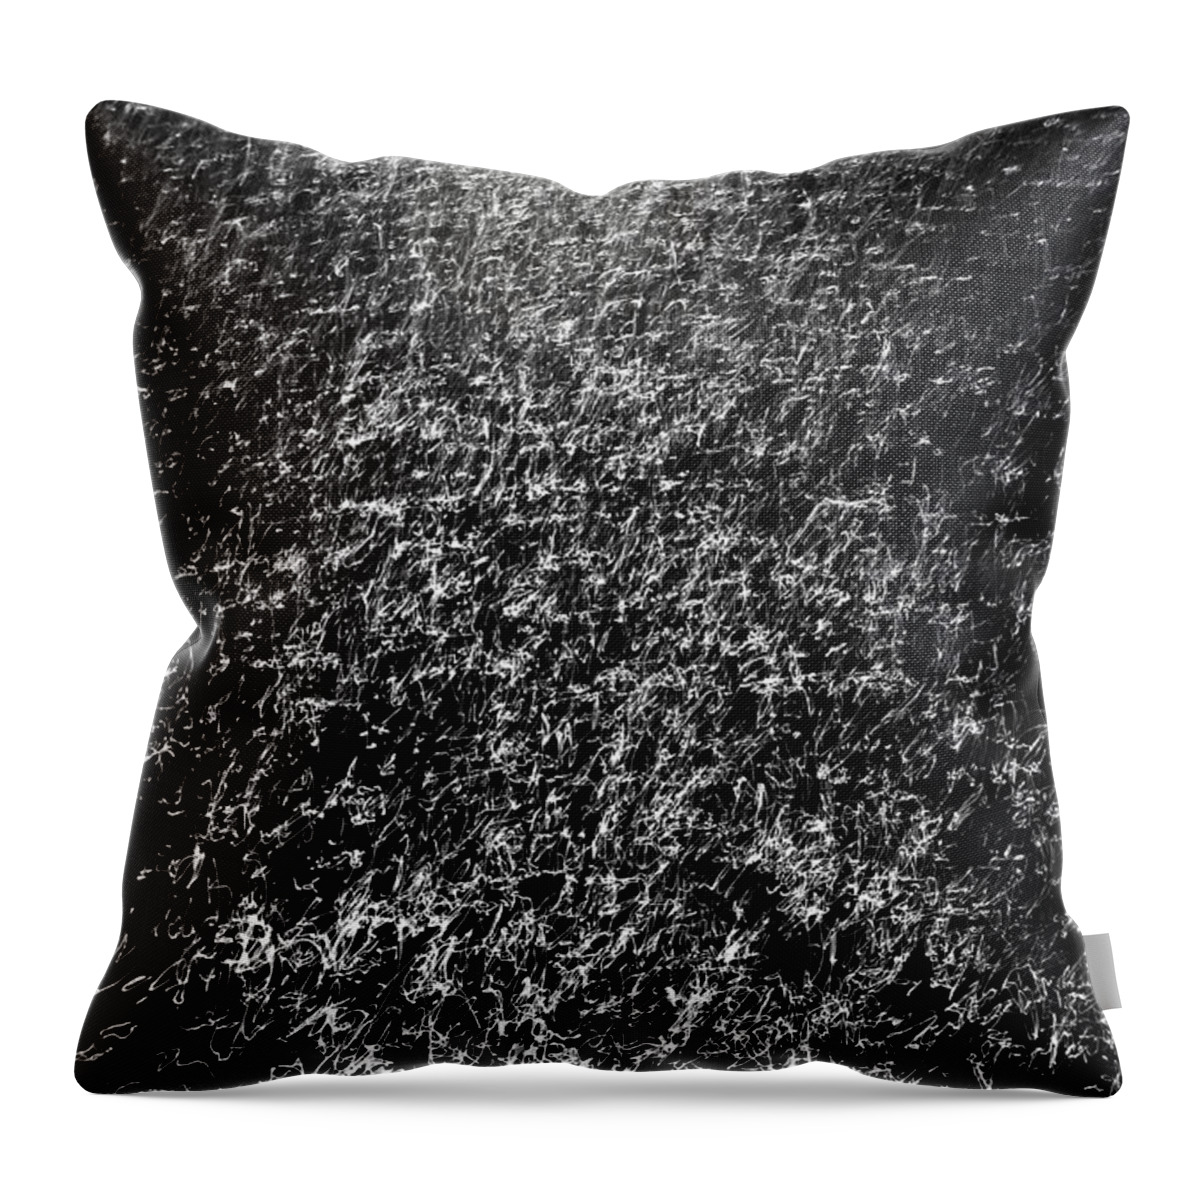 Lysefjorden Throw Pillow featuring the photograph Long Exposure, Reflection Of Waves by Sindre Ellingsen